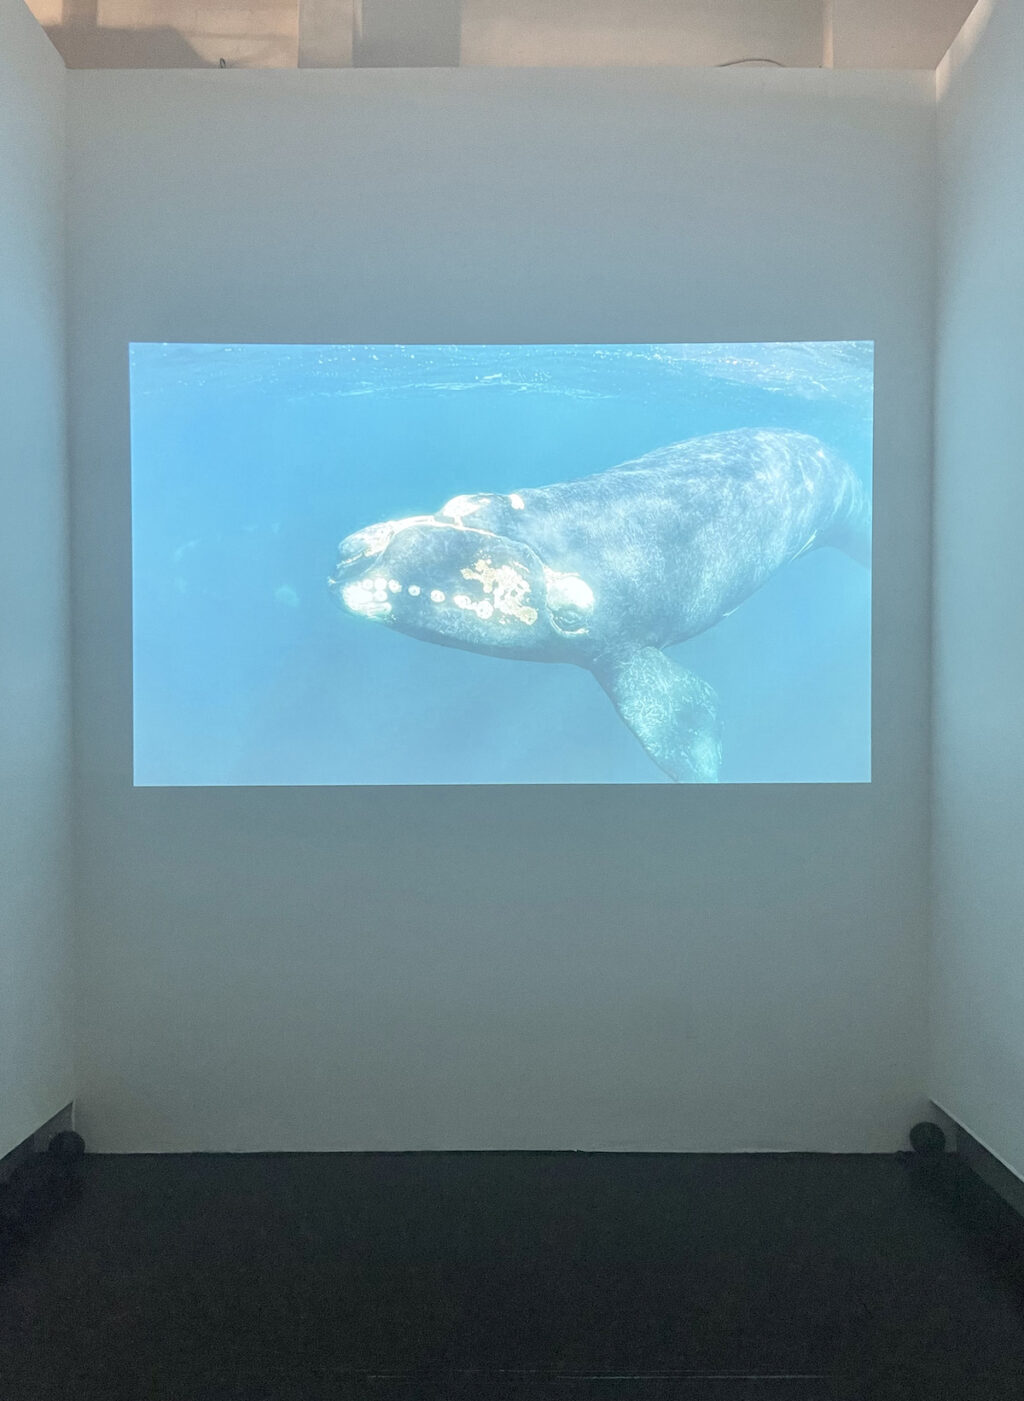 A projection of a whale in the back gallery of the exhibition in a new video work that accompanies the artistic installation.